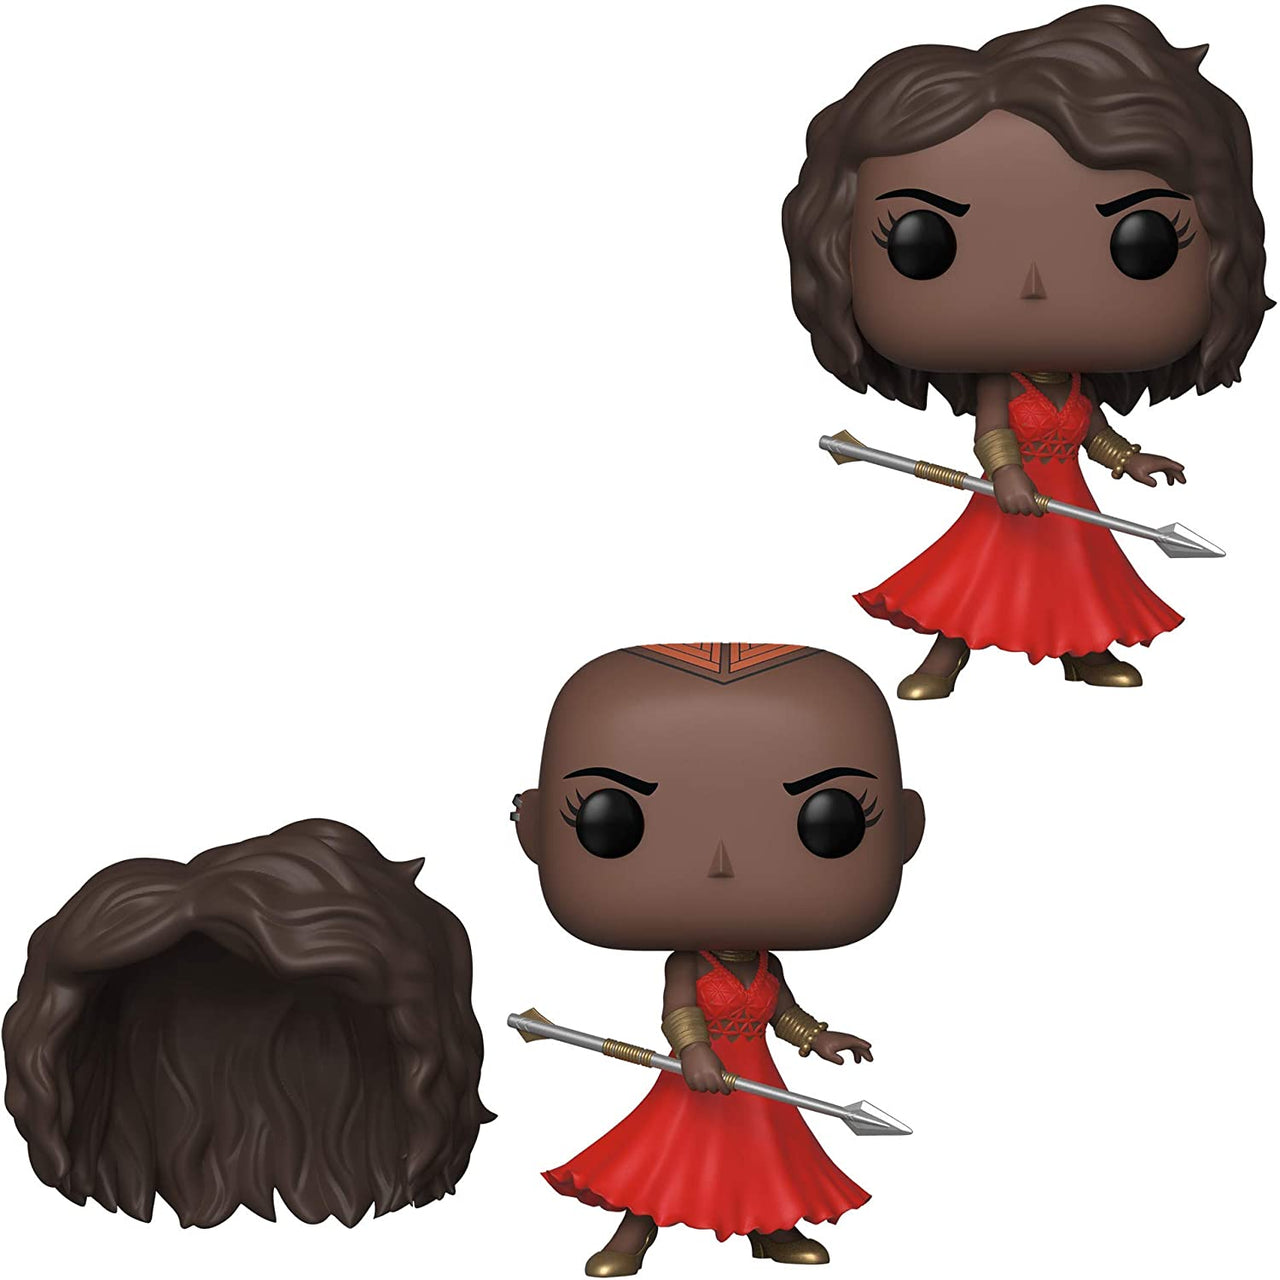 Funko POP! Marvel: Black Panther - Okoye with Red Dress and Removable Wig, Fall Convention Exclusive